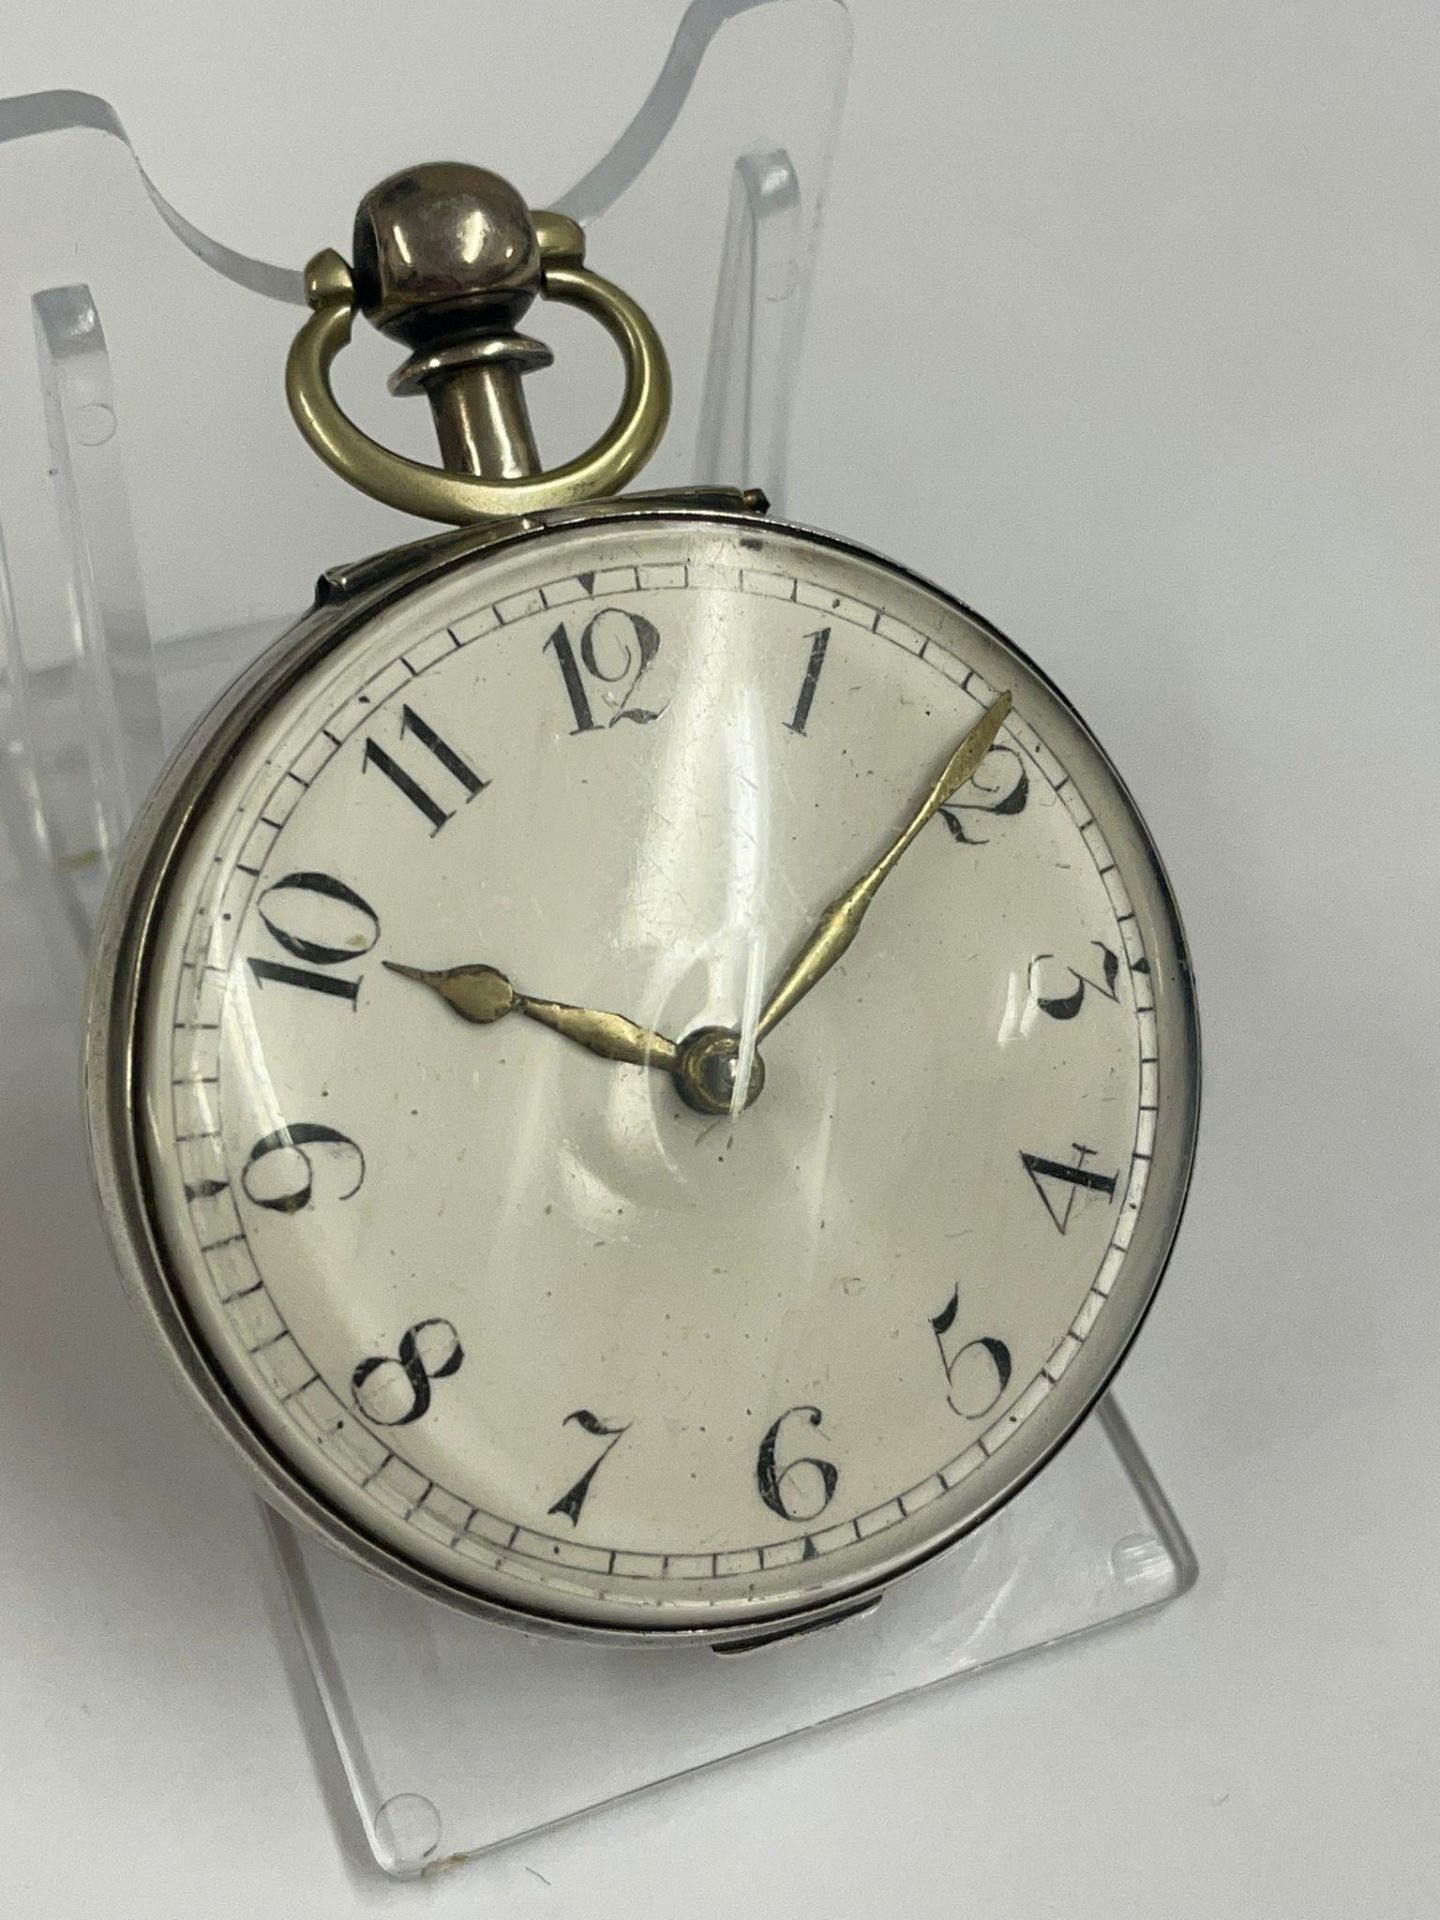 Antique silver verge fusee pocket watch , as found - Image 2 of 3